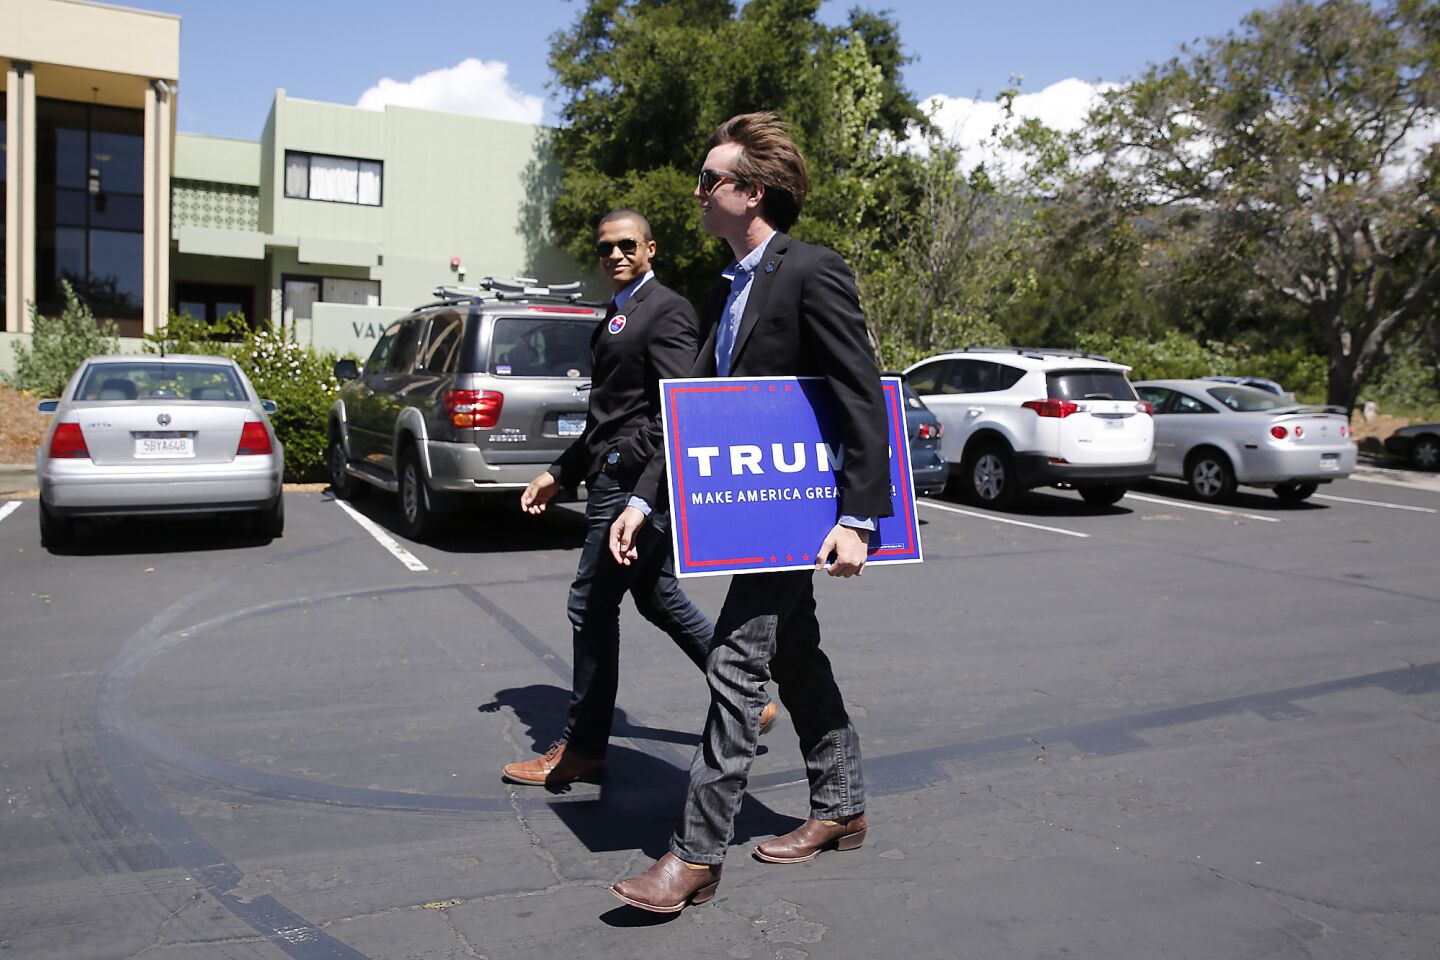 Students rally for Trump at Westmont College